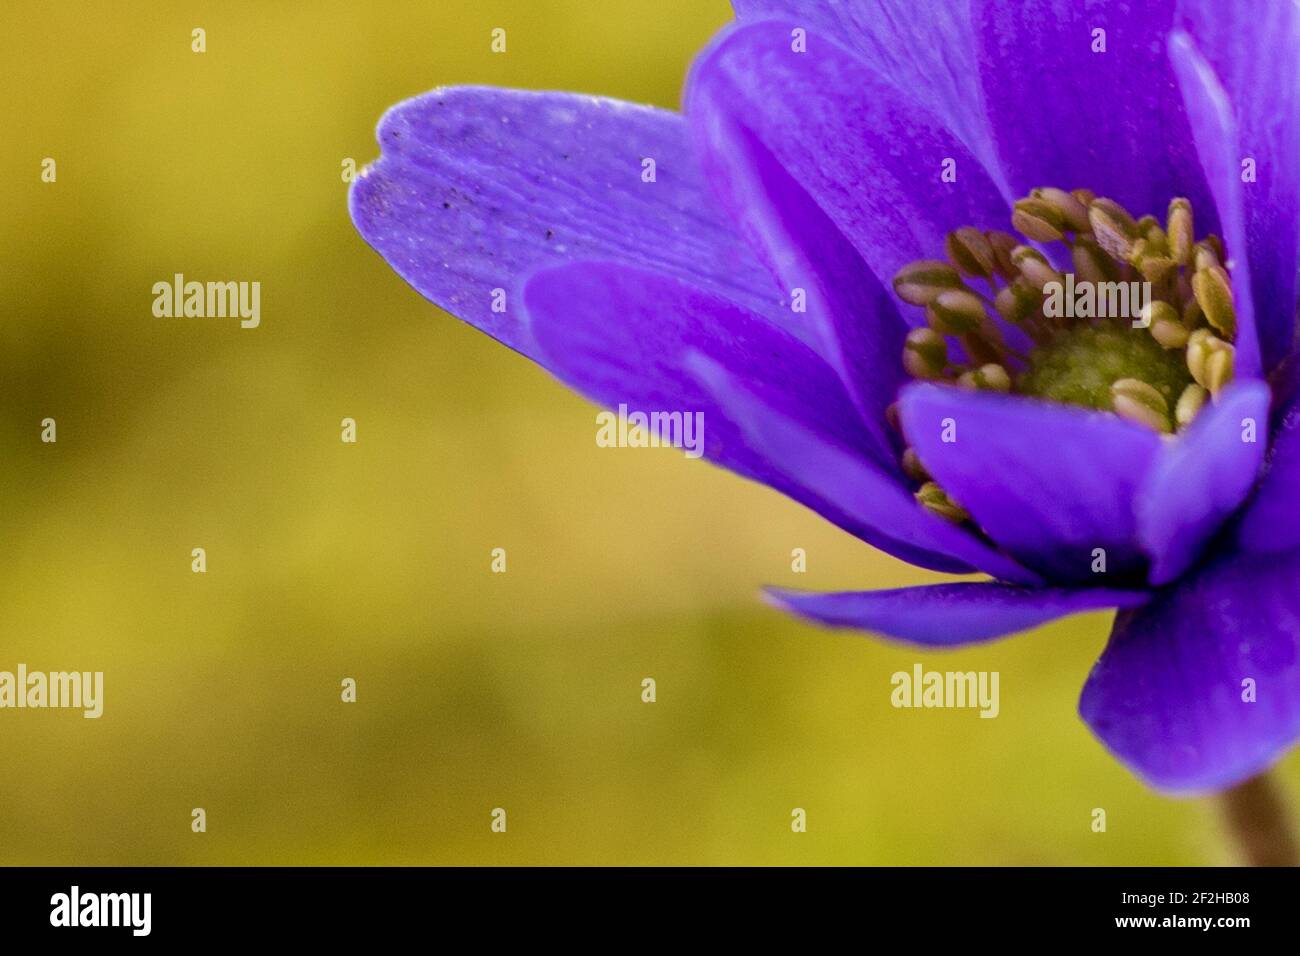 Purple flowering Anemone blossom against green background for copy space, extreme close up Stock Photo